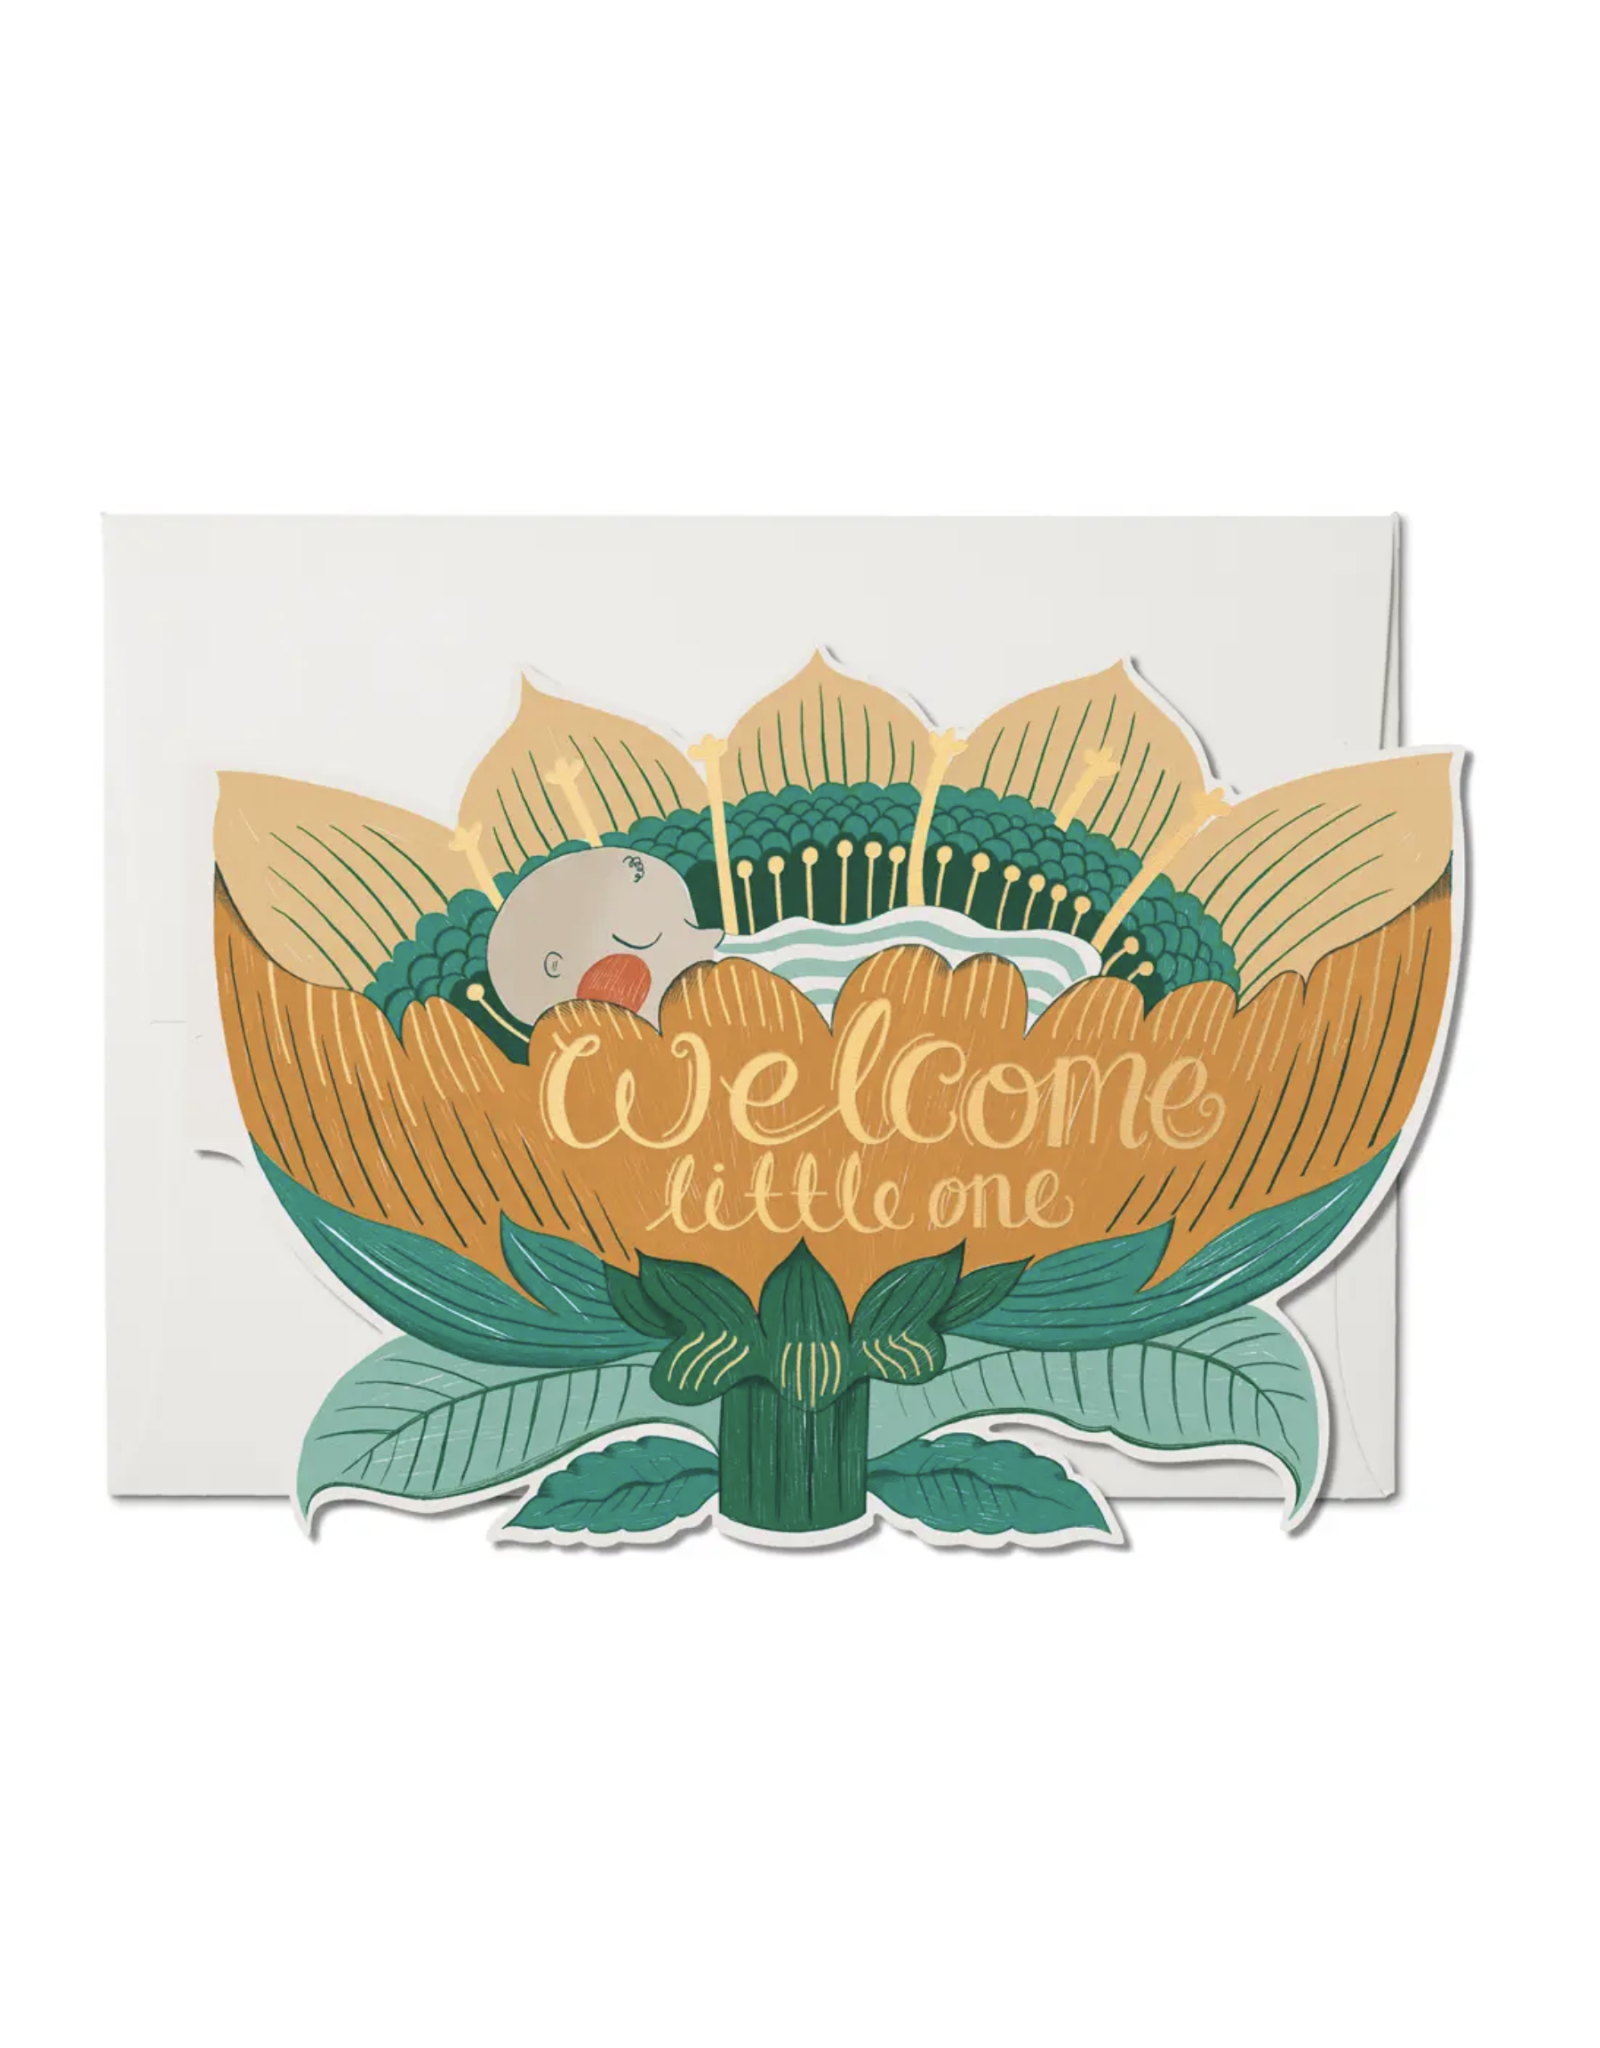 Welcome Little One Baby Blossom Greeting Card